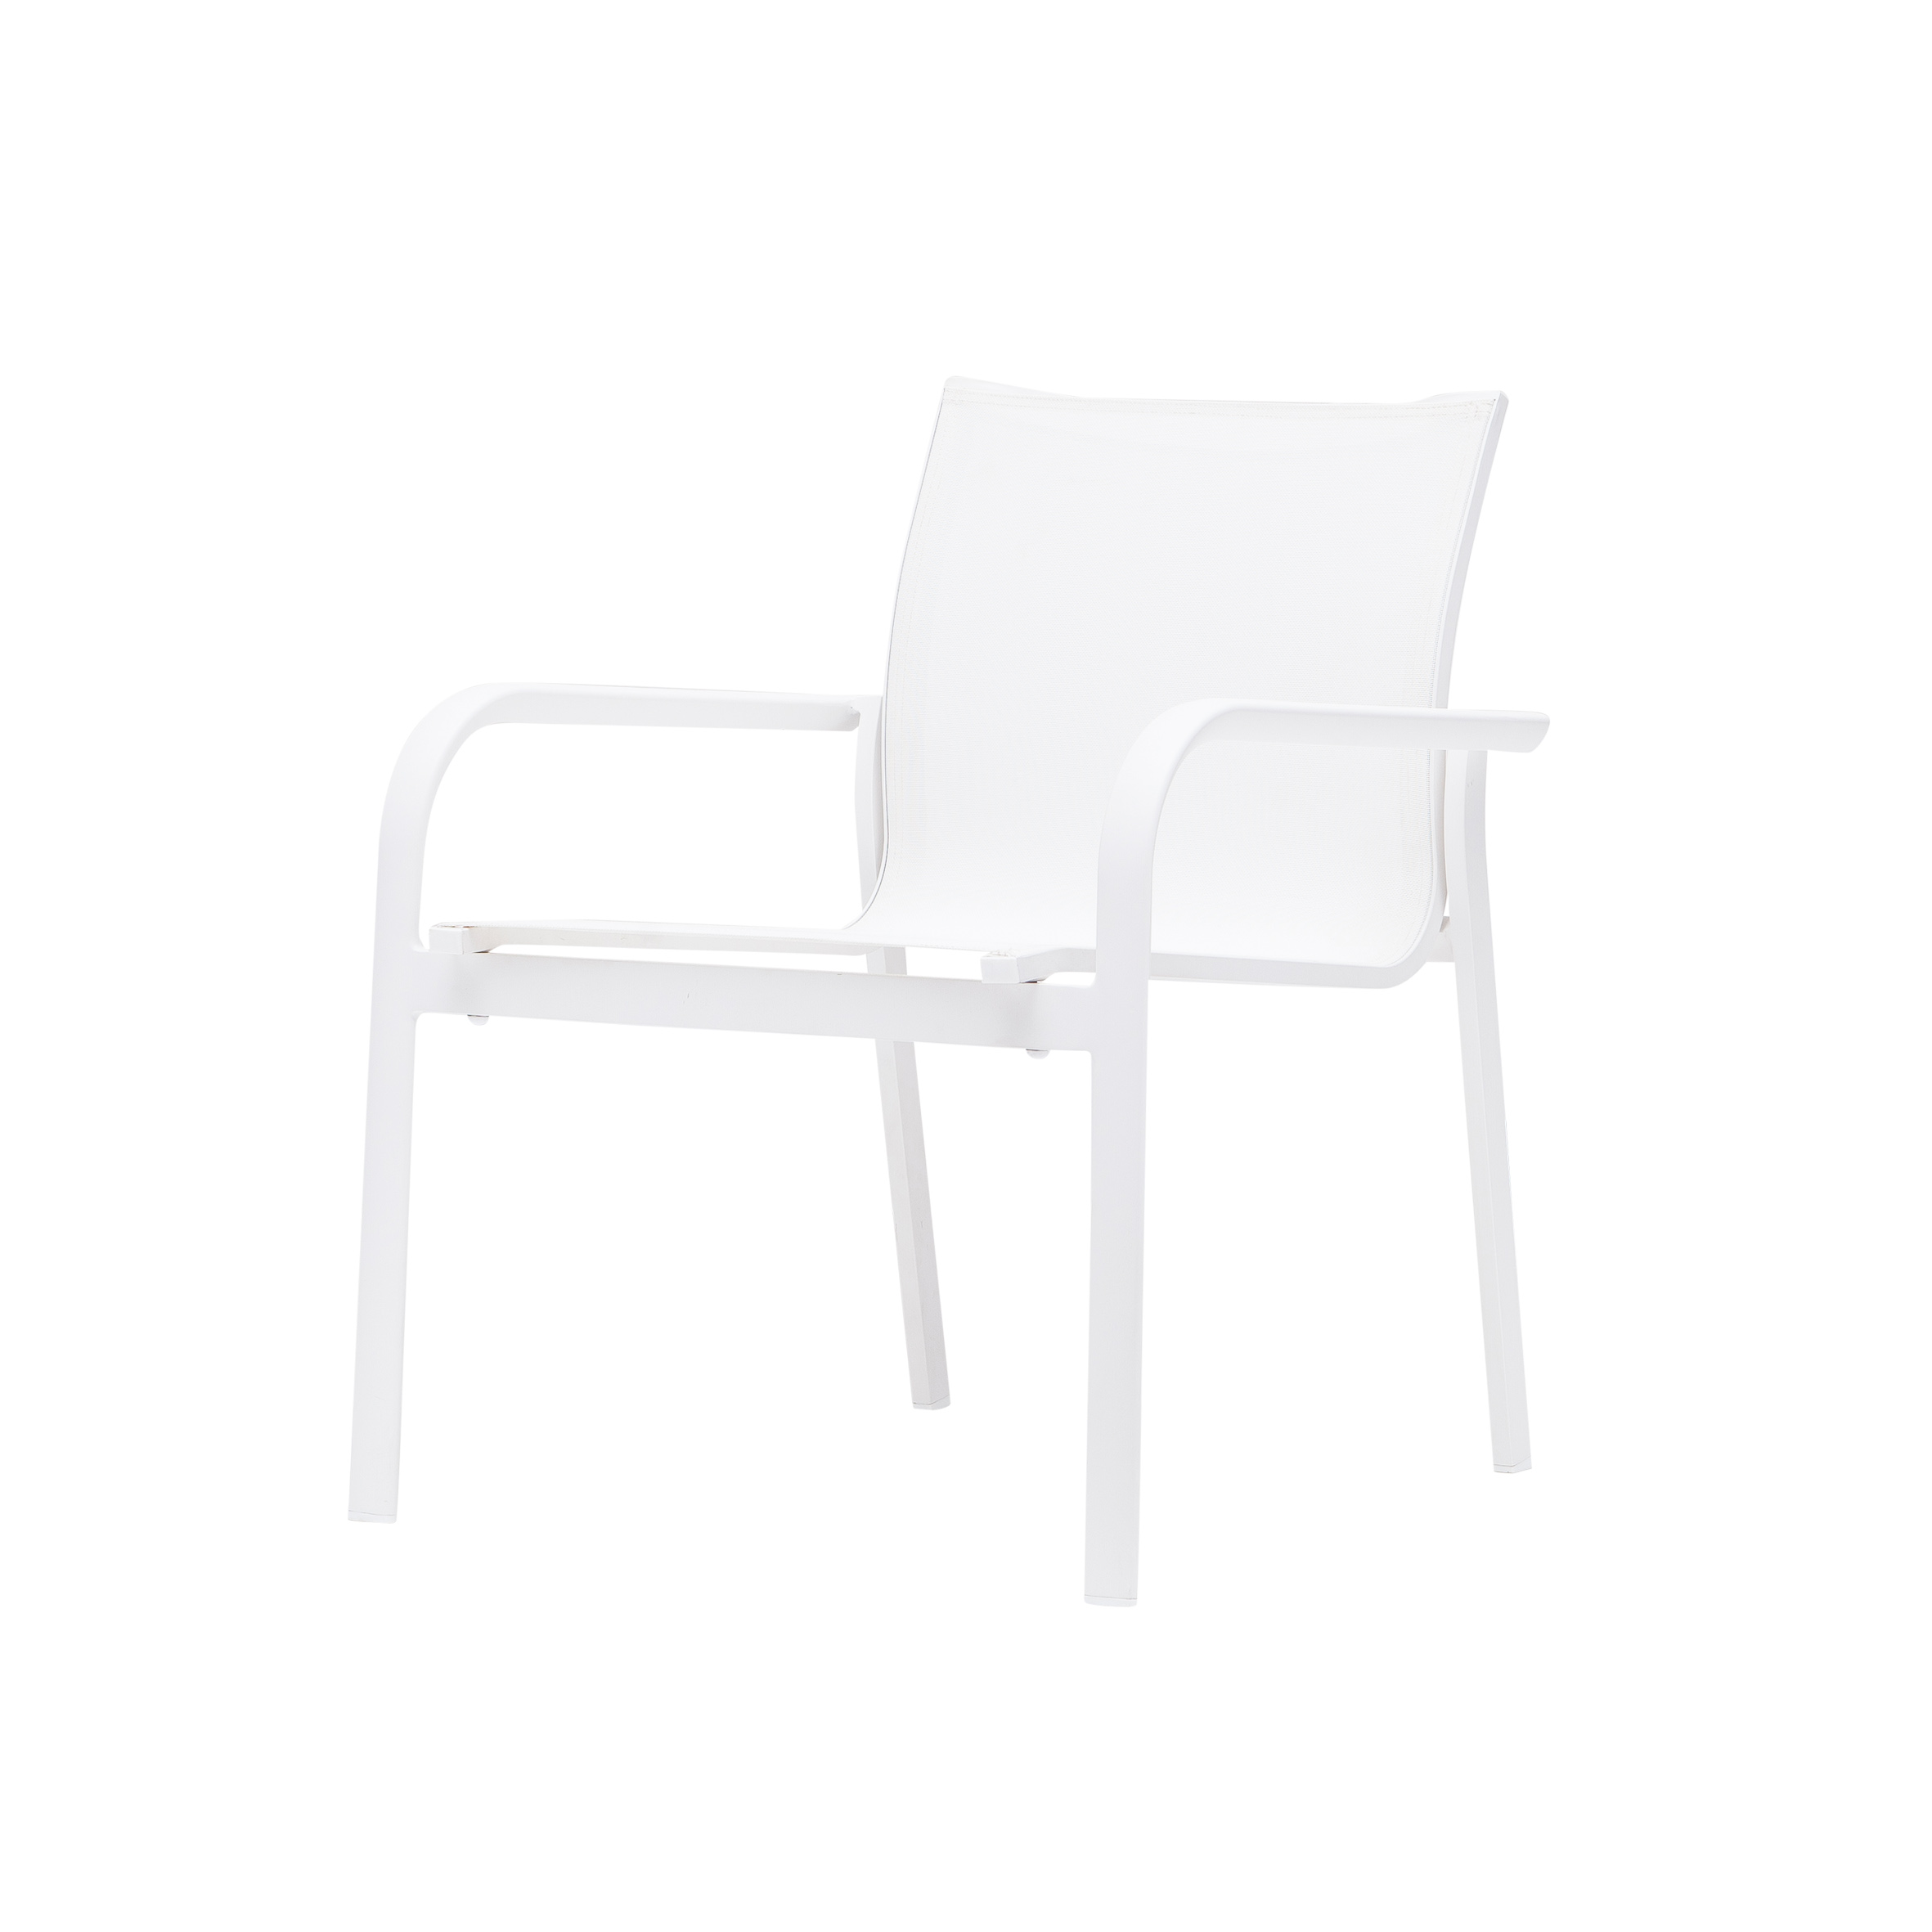 Shop Space Textilene Leisure Chairs from Top Factory - Guaranteed Quality!